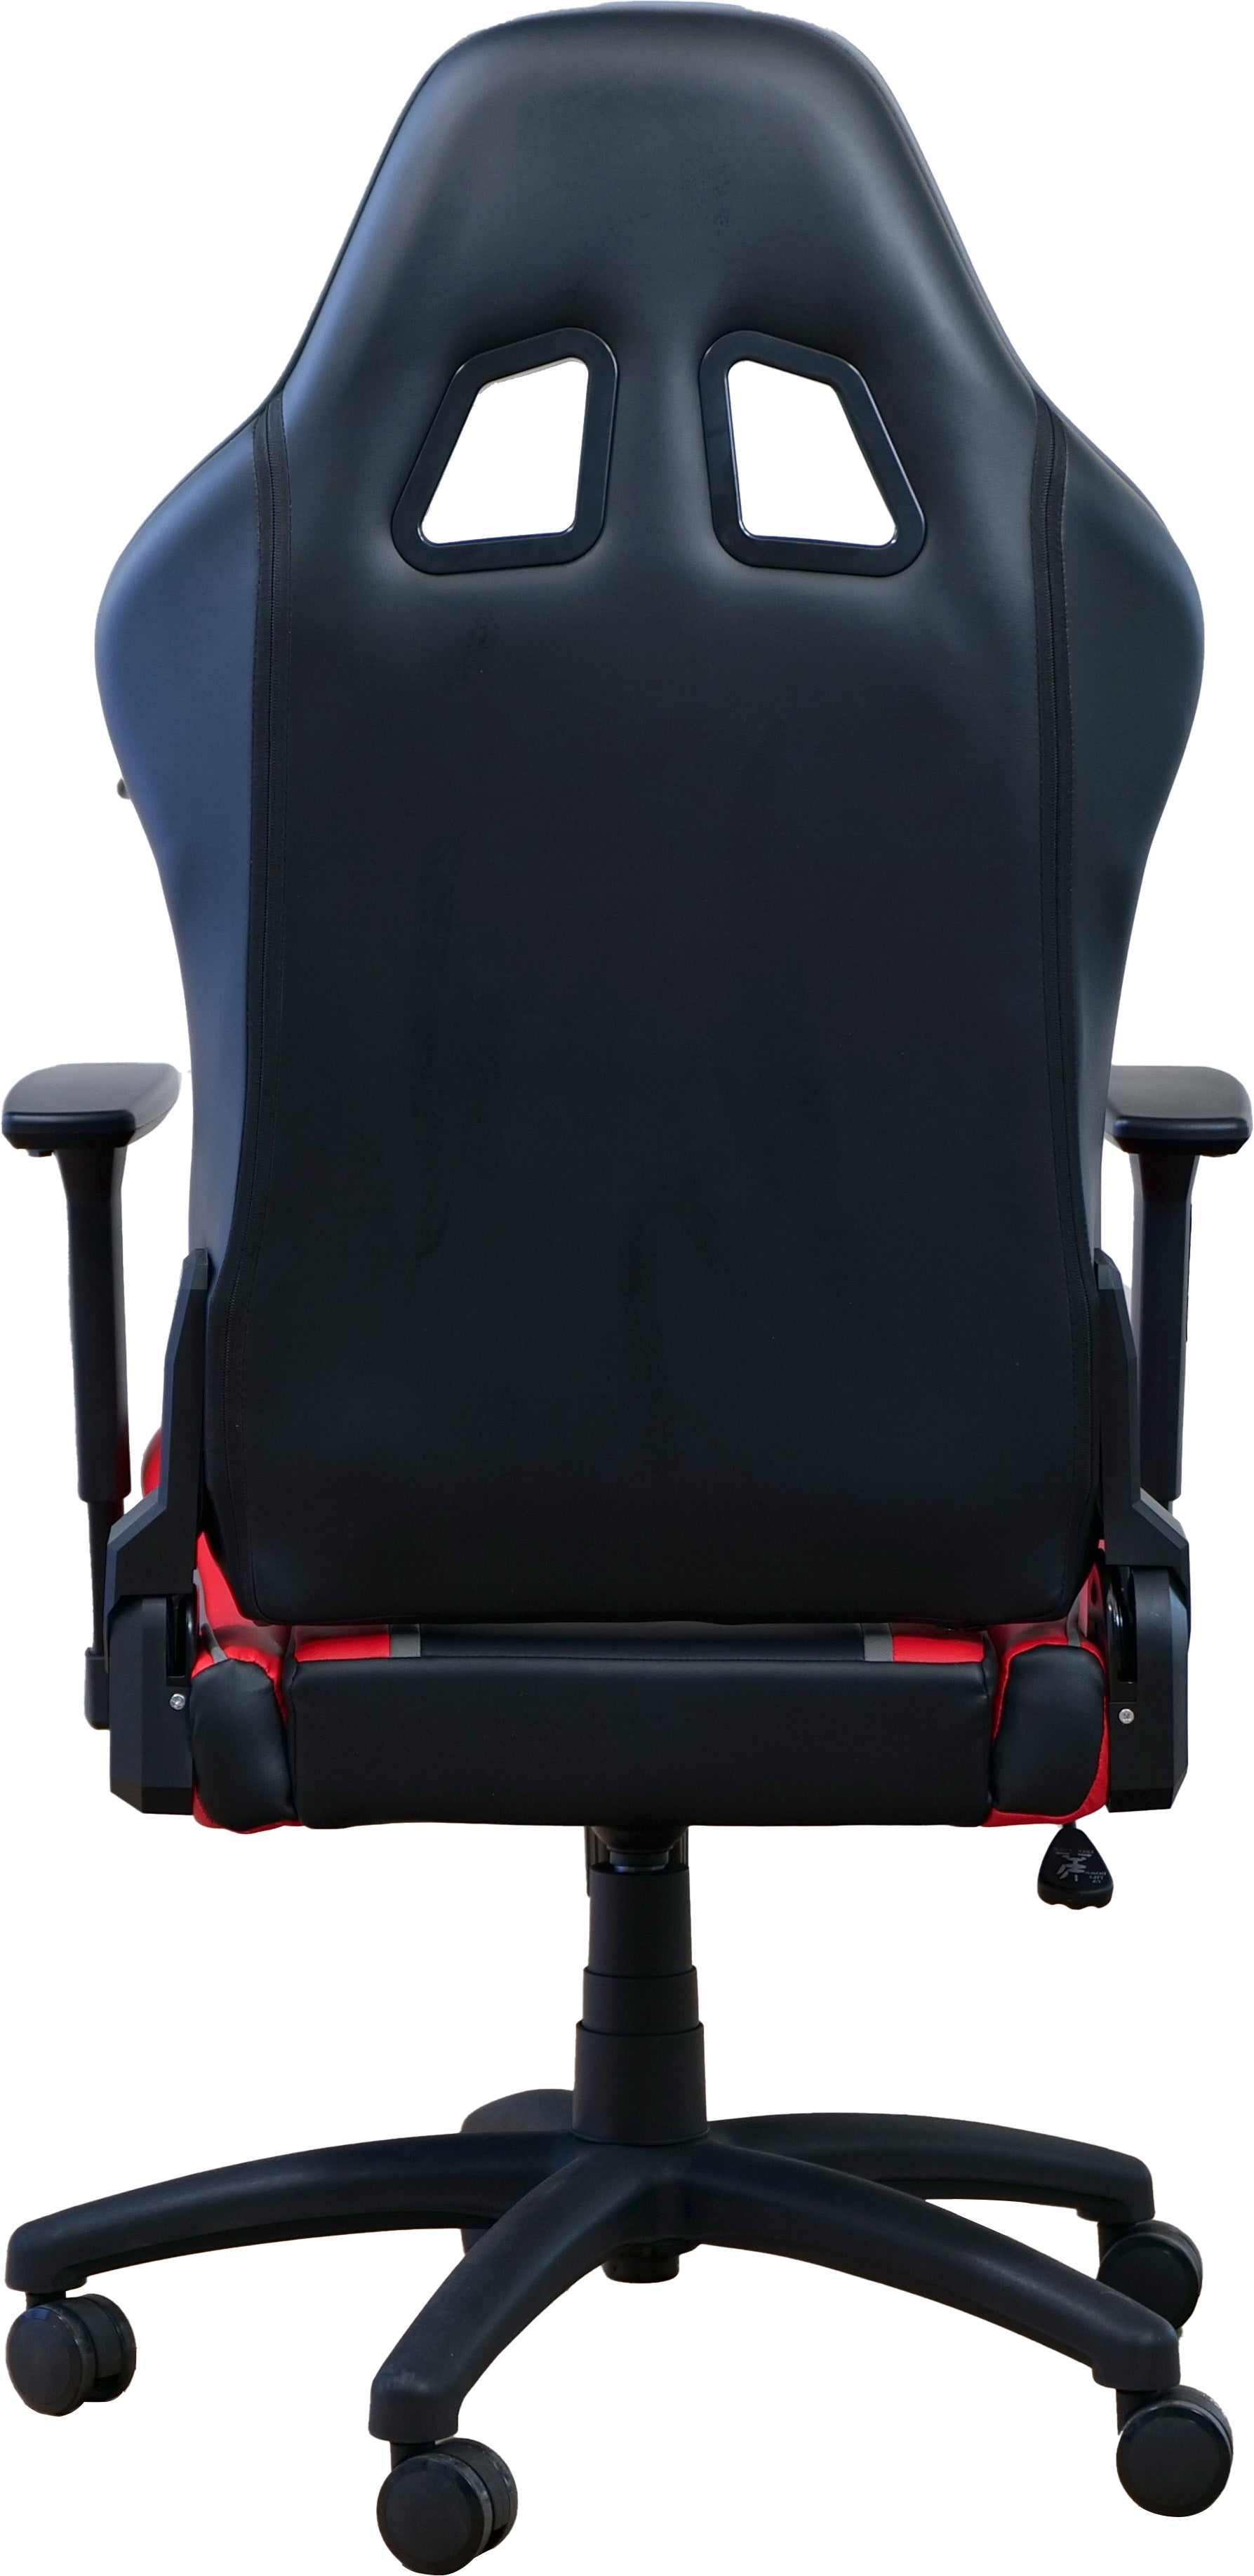 Gaming Chair - Holden